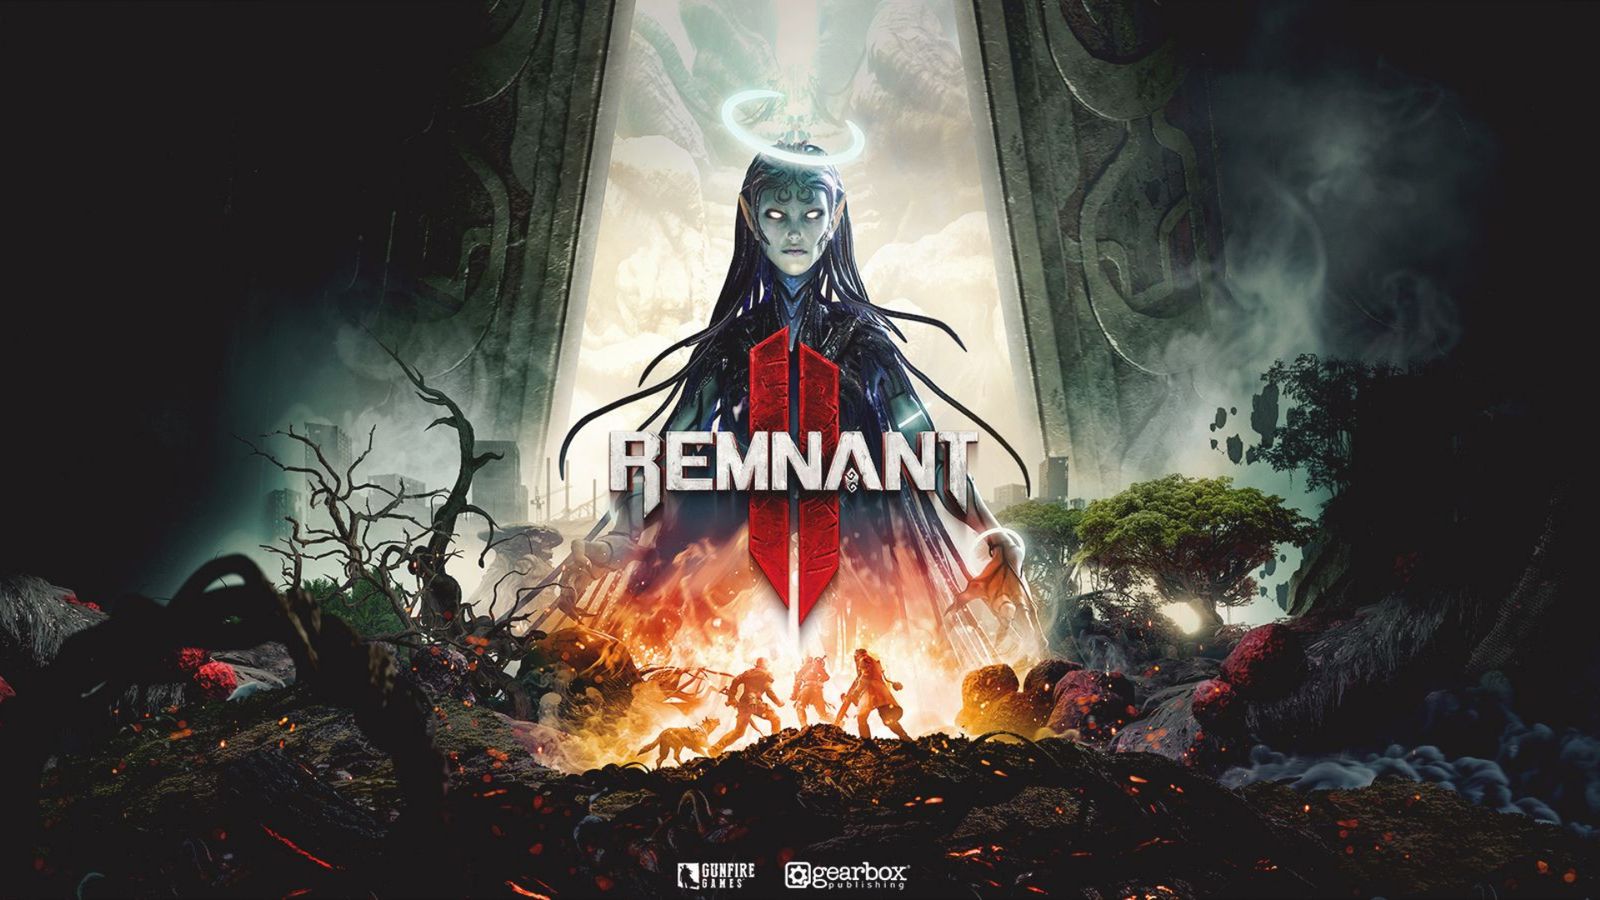 The cover image for Remnant 2